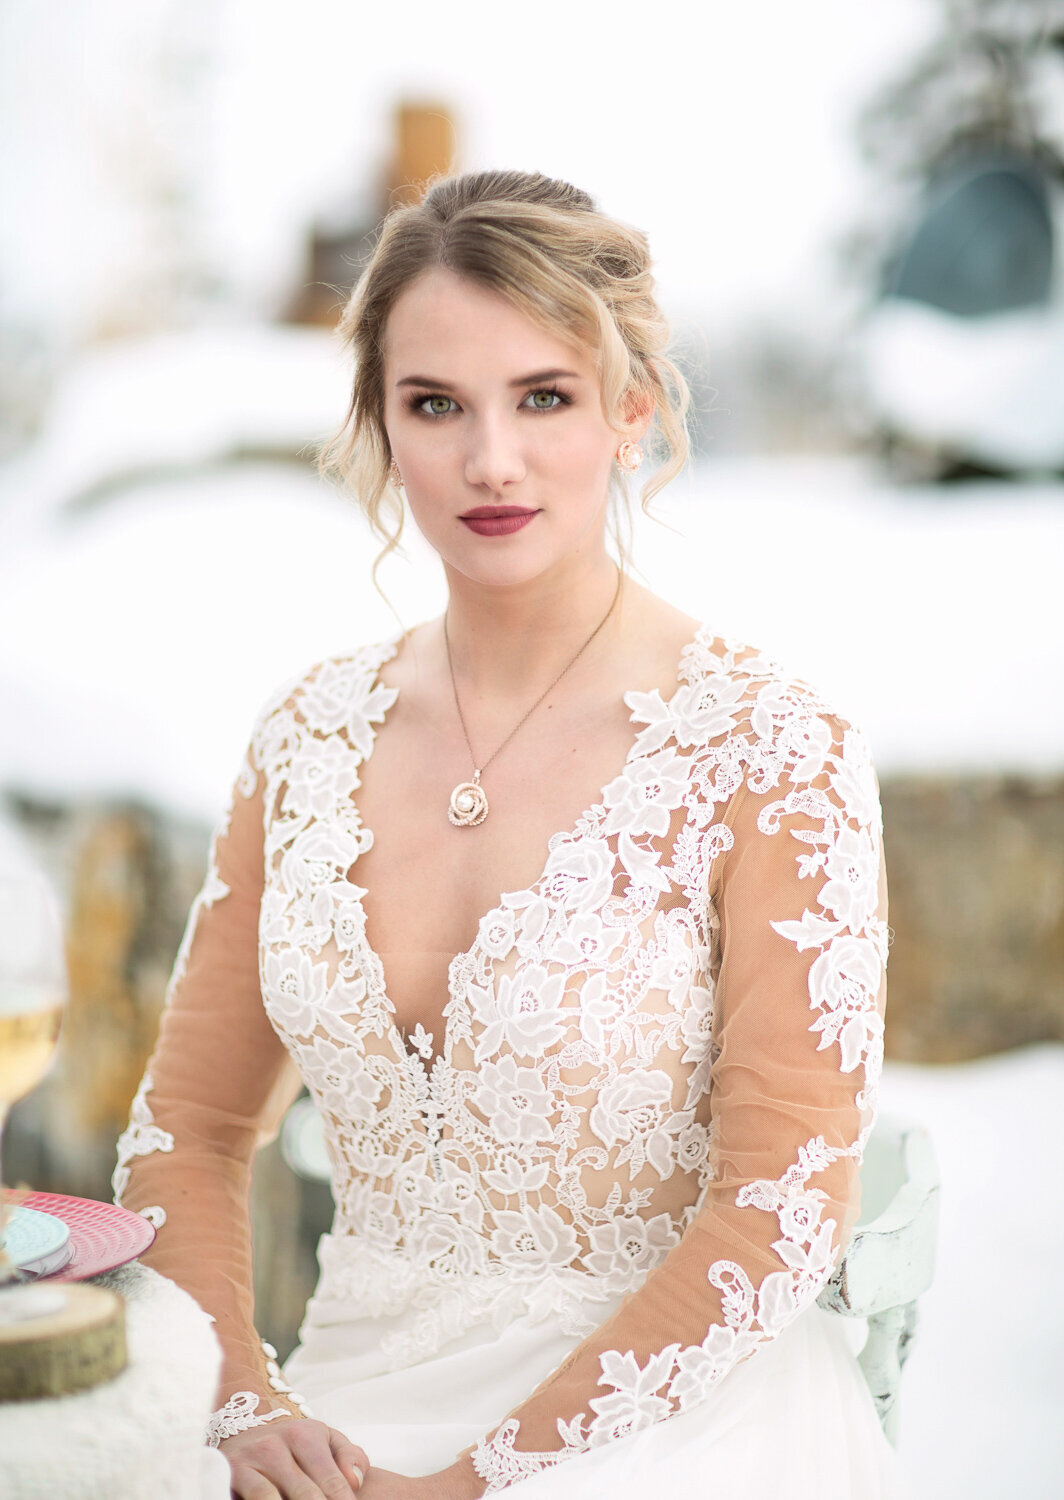 Classic bridal hair and makeup by Amplified Artistry, romantic & professional Calgary hair and makeup artist, featured on the Brontë Bride Vendor Guide.